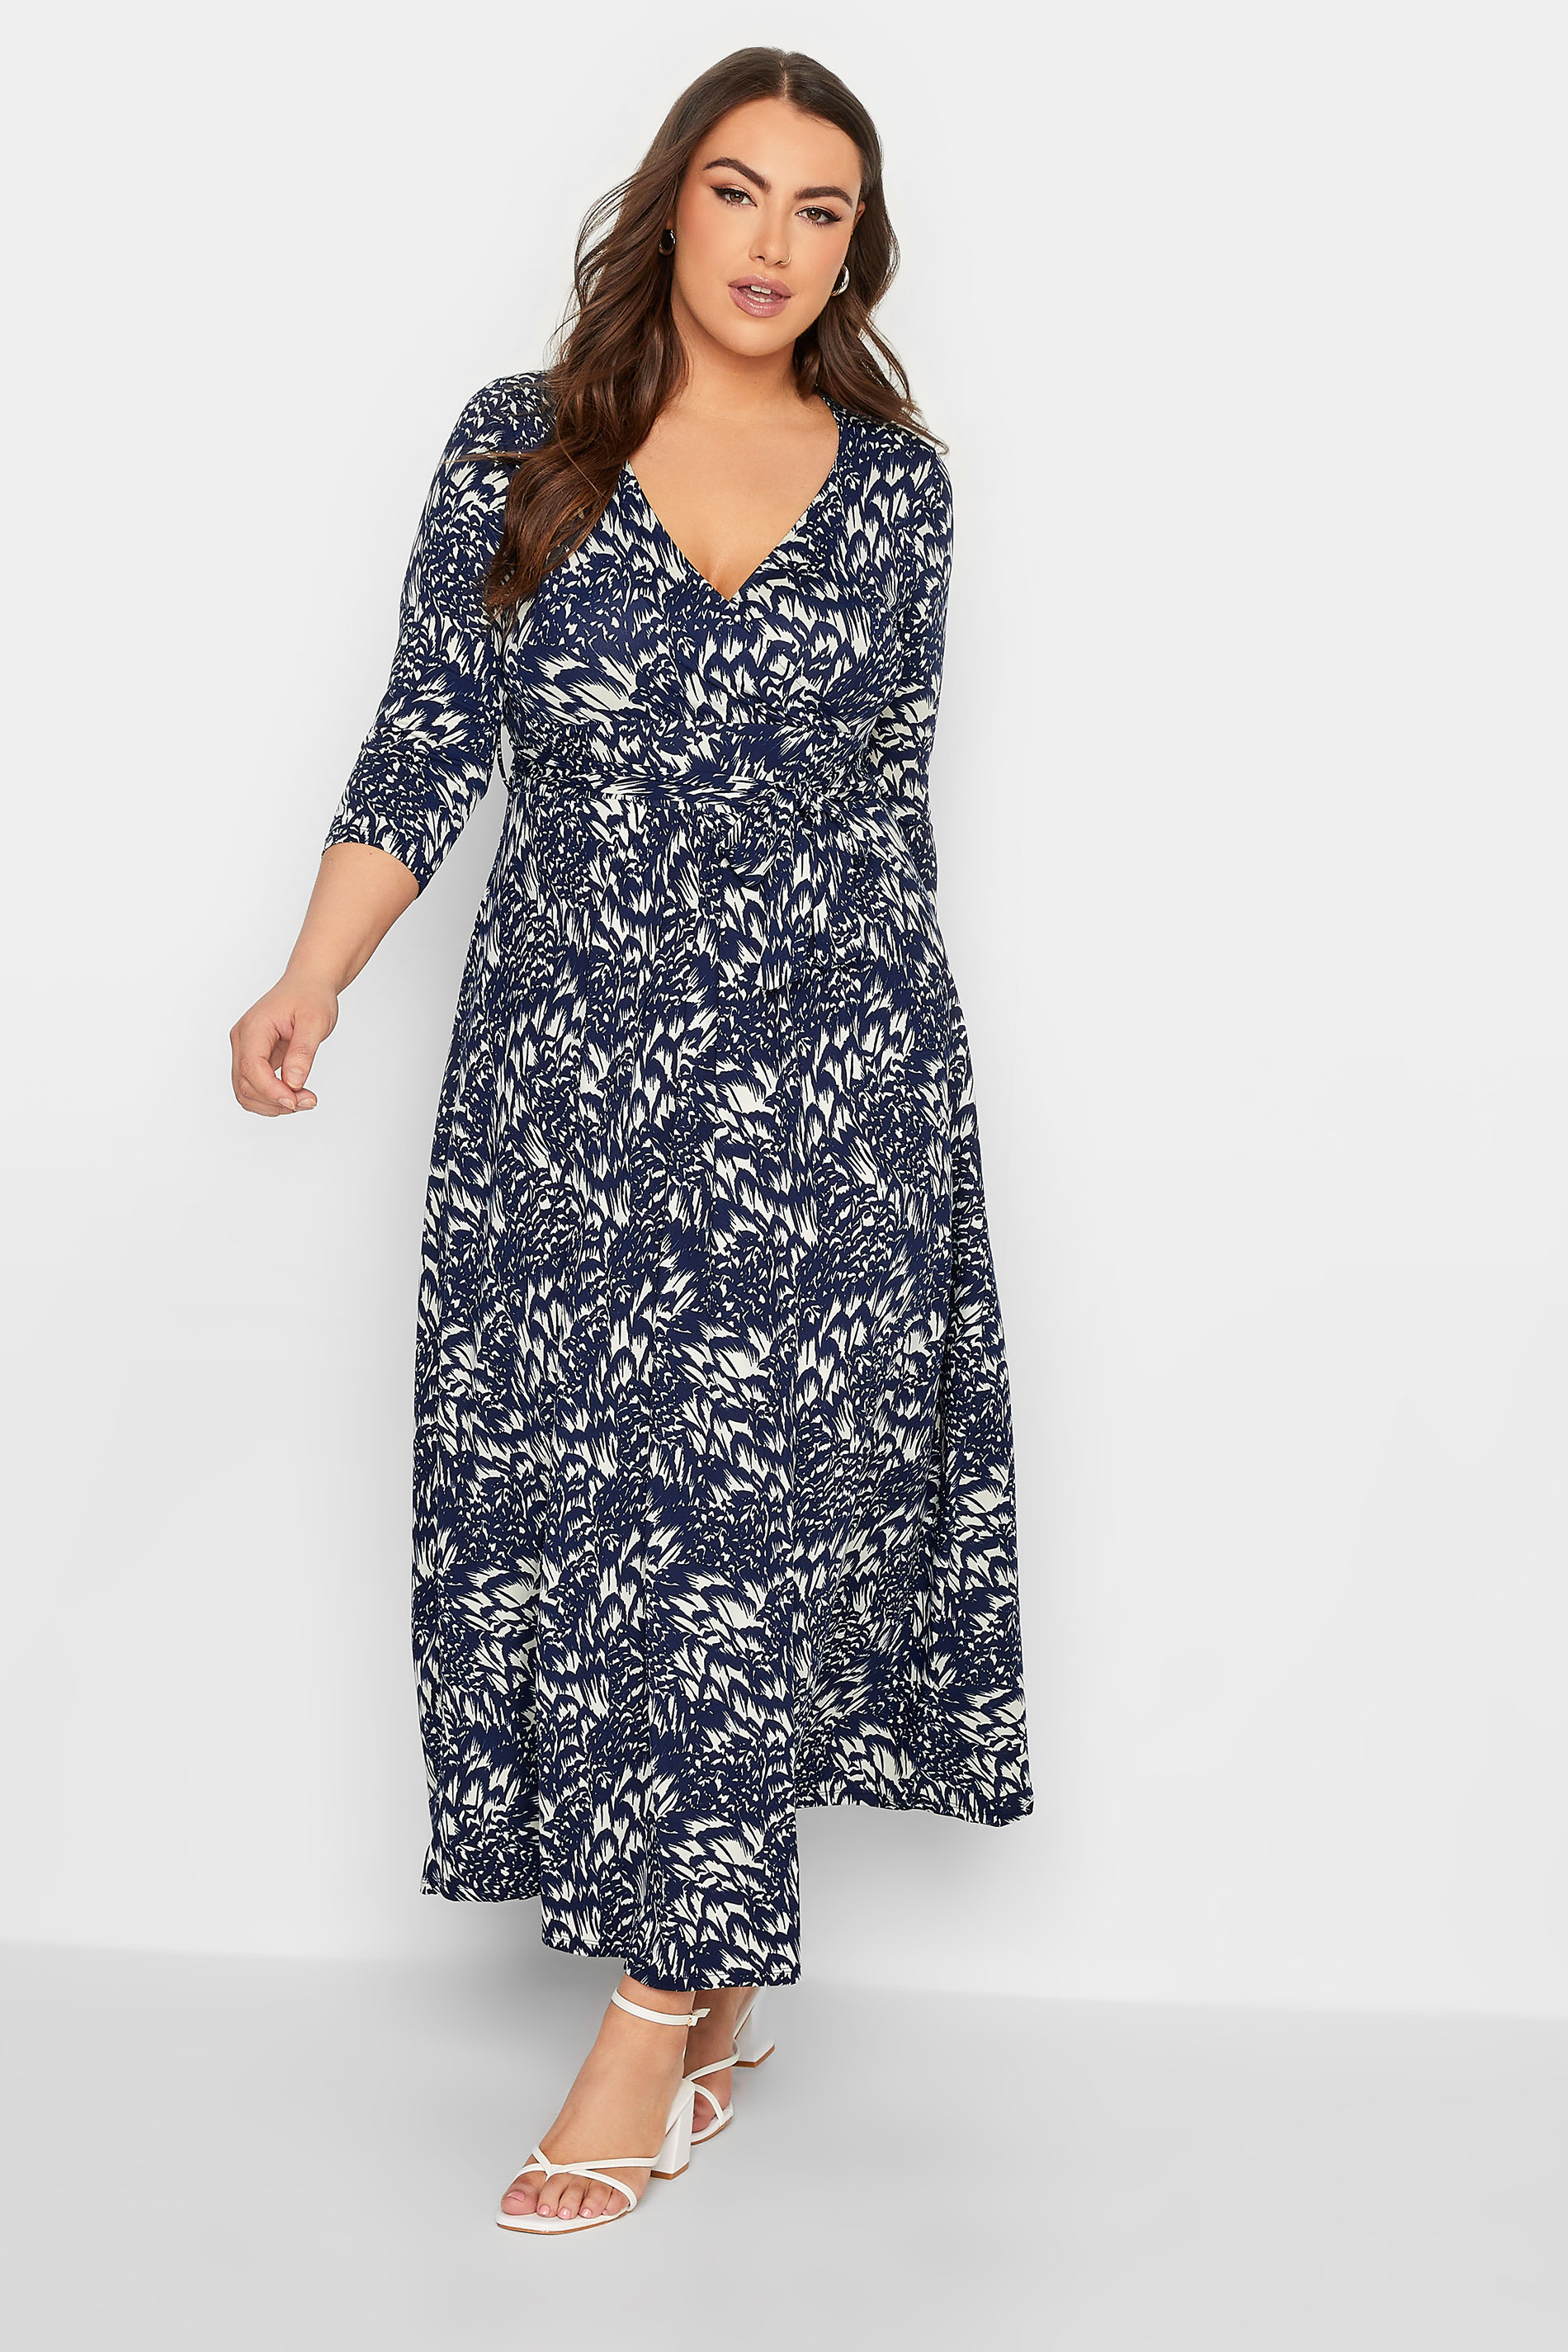 YOURS Curve Plus Size Navy Blue Floral Print Maxi Dress | Yours Clothing